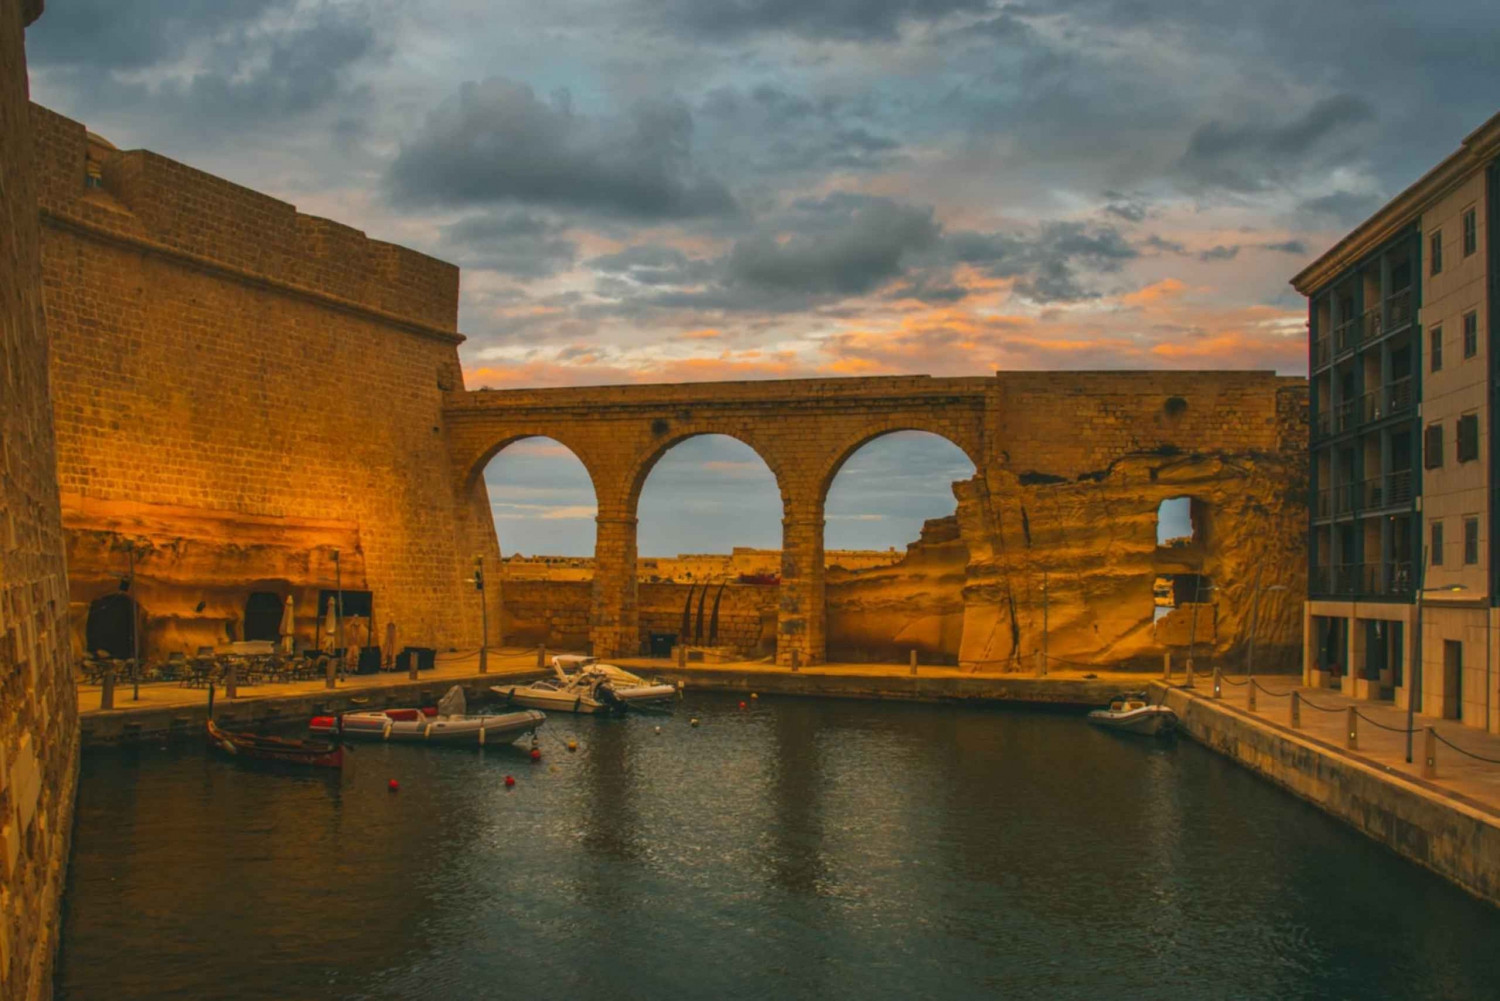 Birgu: Fort St. Angelo E-ticket with Audio Tour